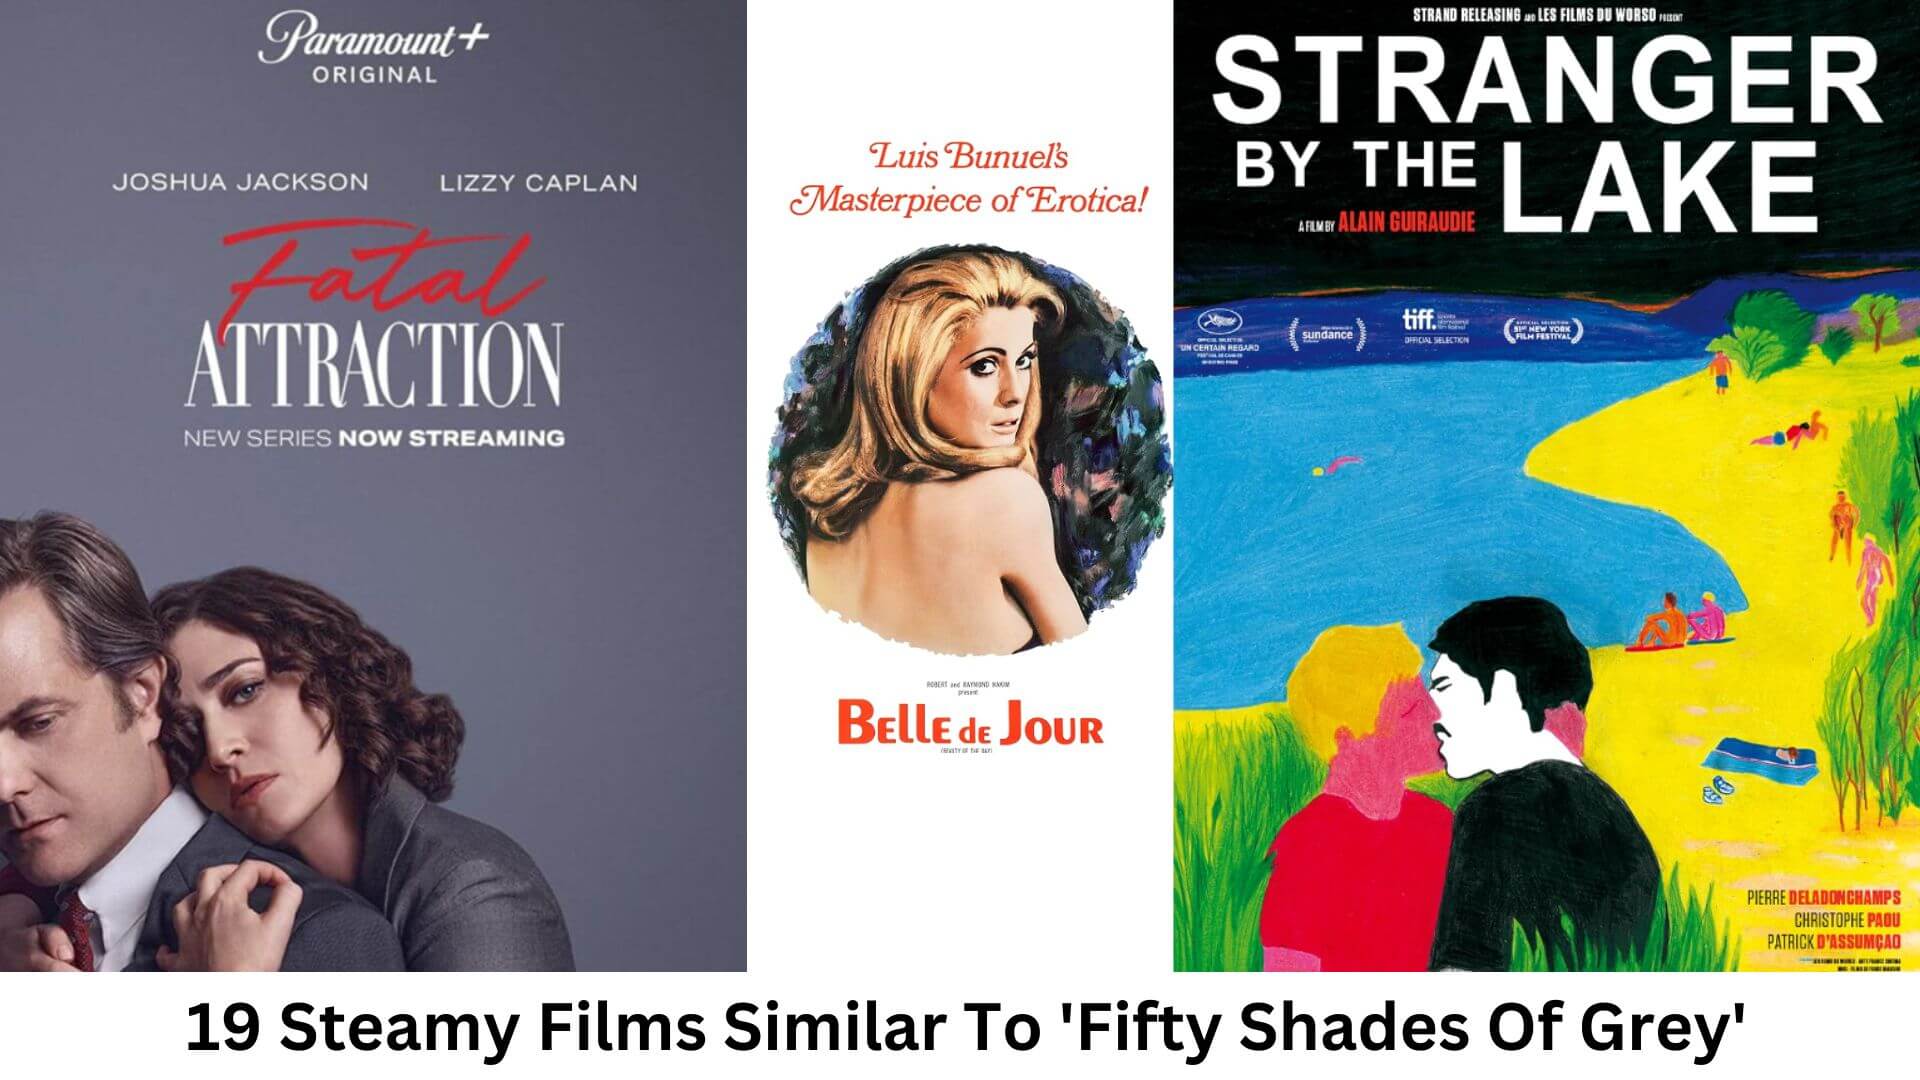 19 Steamy Films Similar To 'Fifty Shades Of Grey'